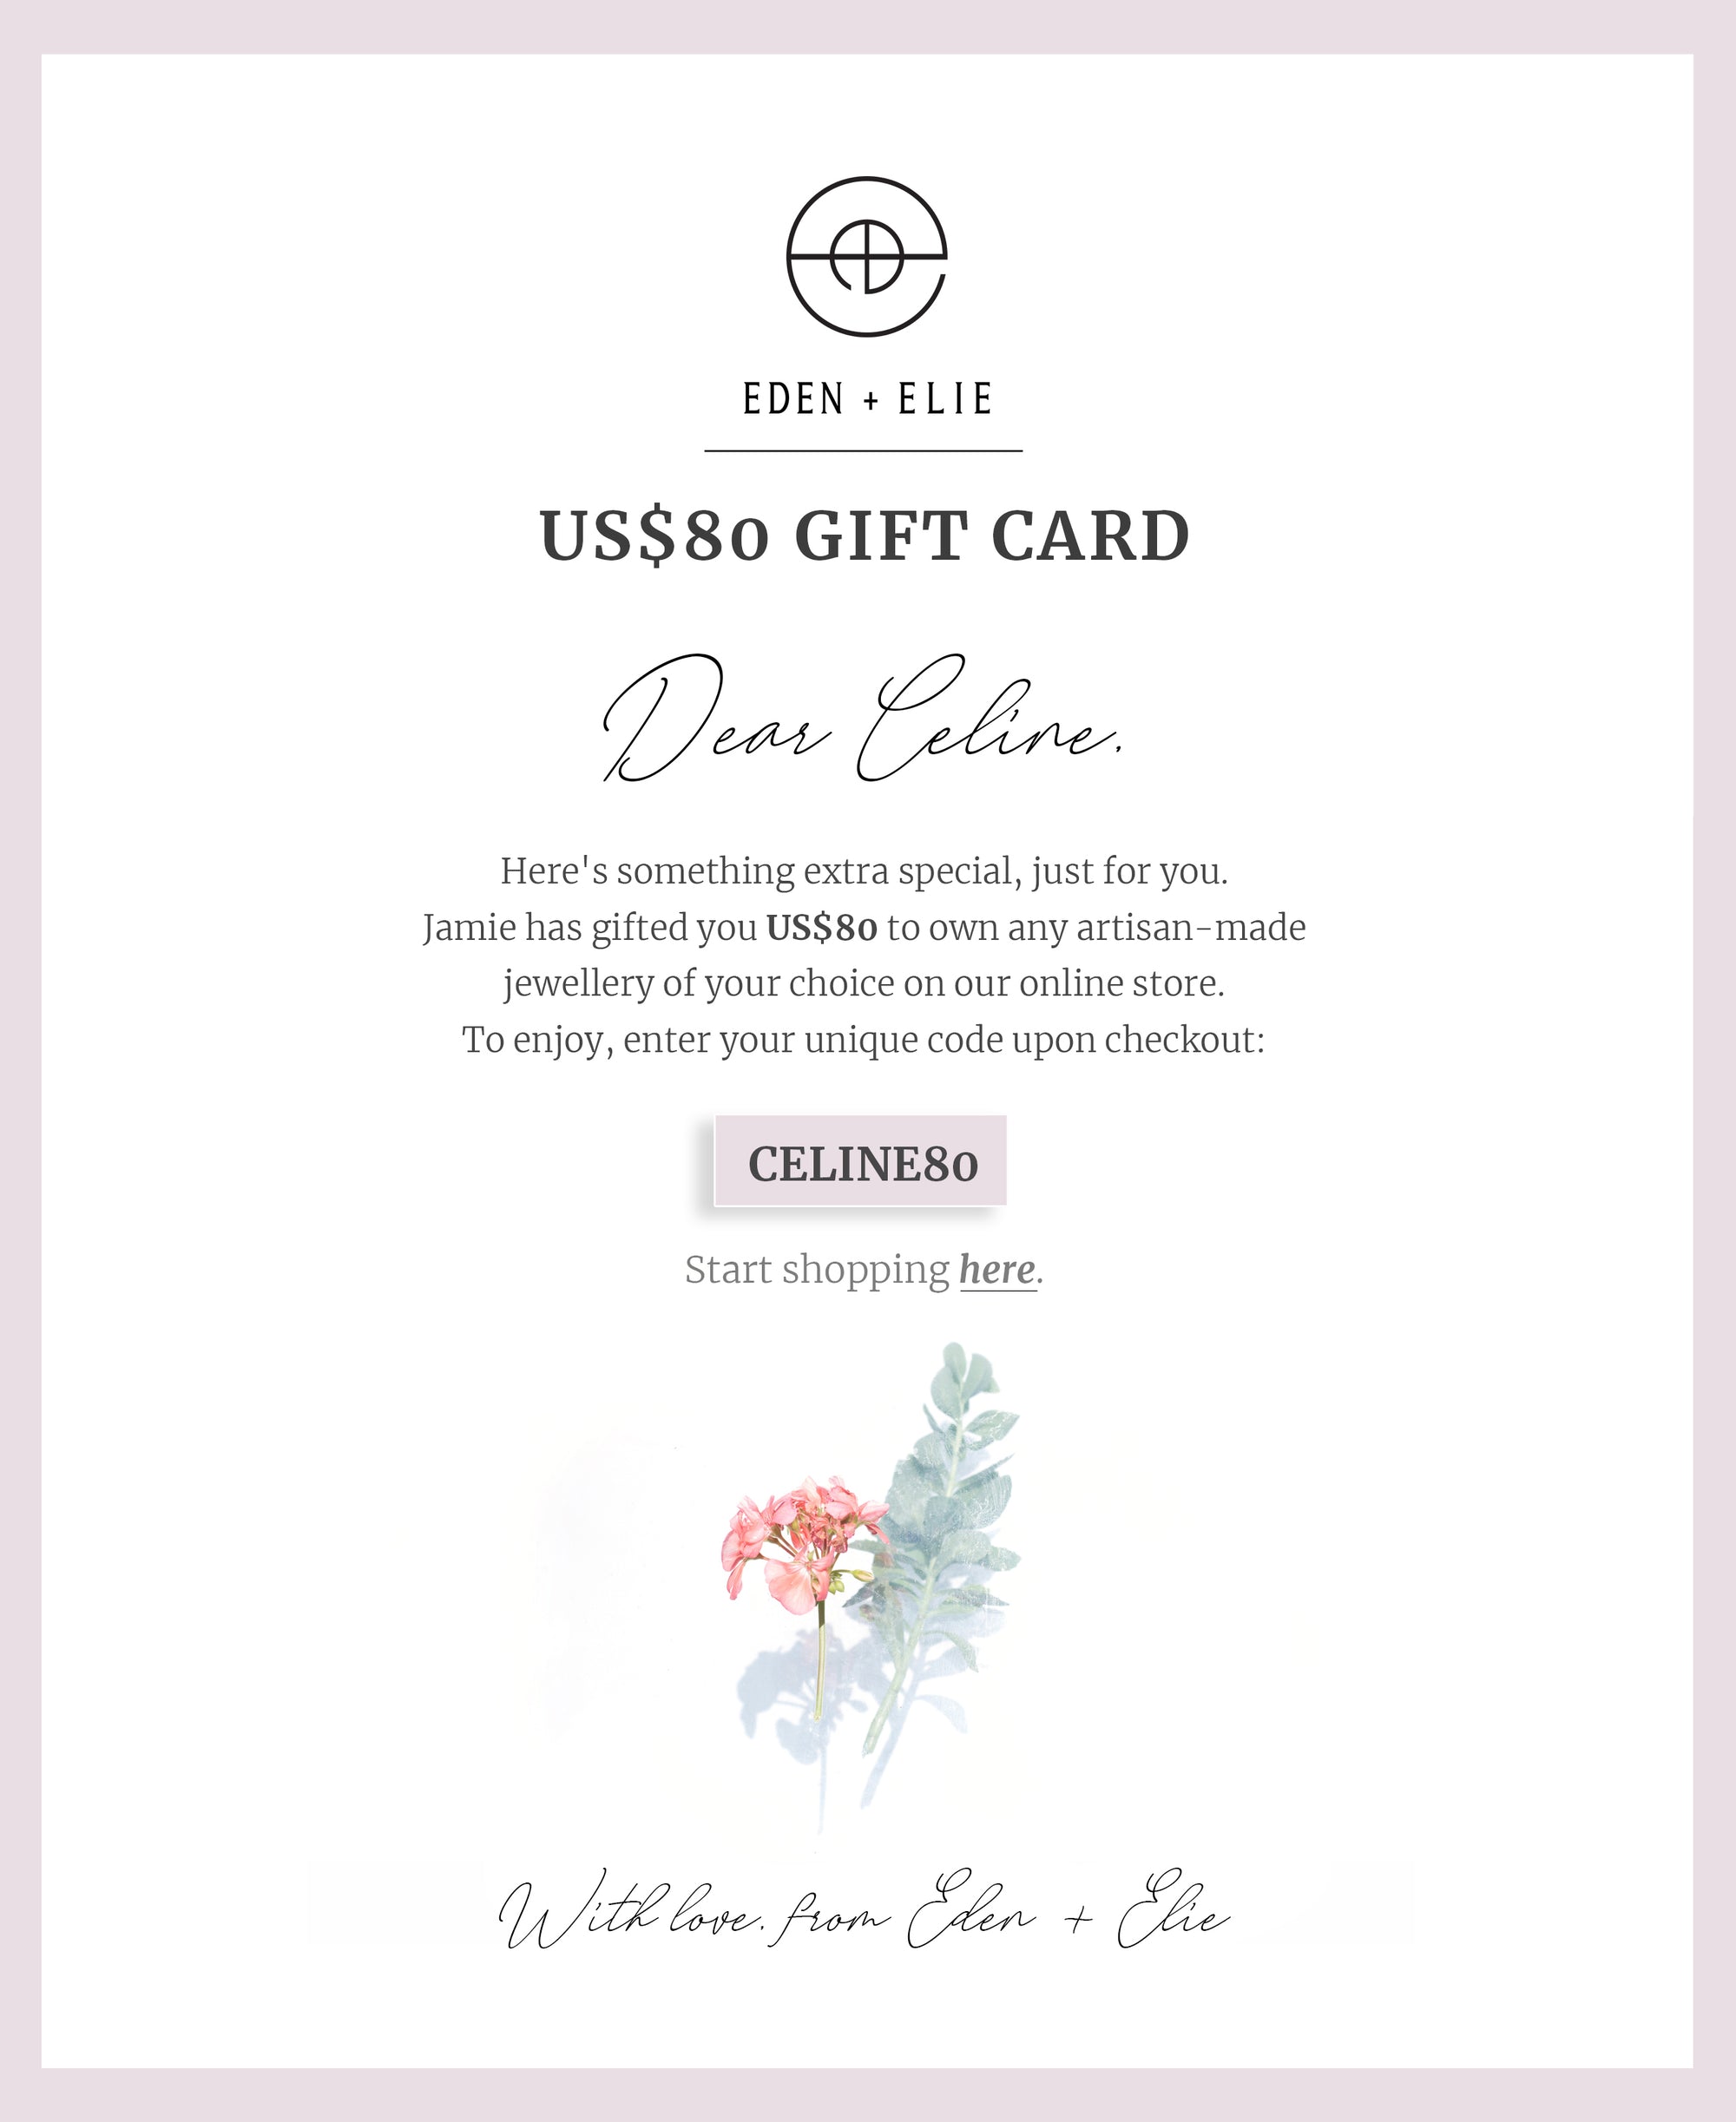 EDEN + ELIE Personalized E-Gift Card - $80